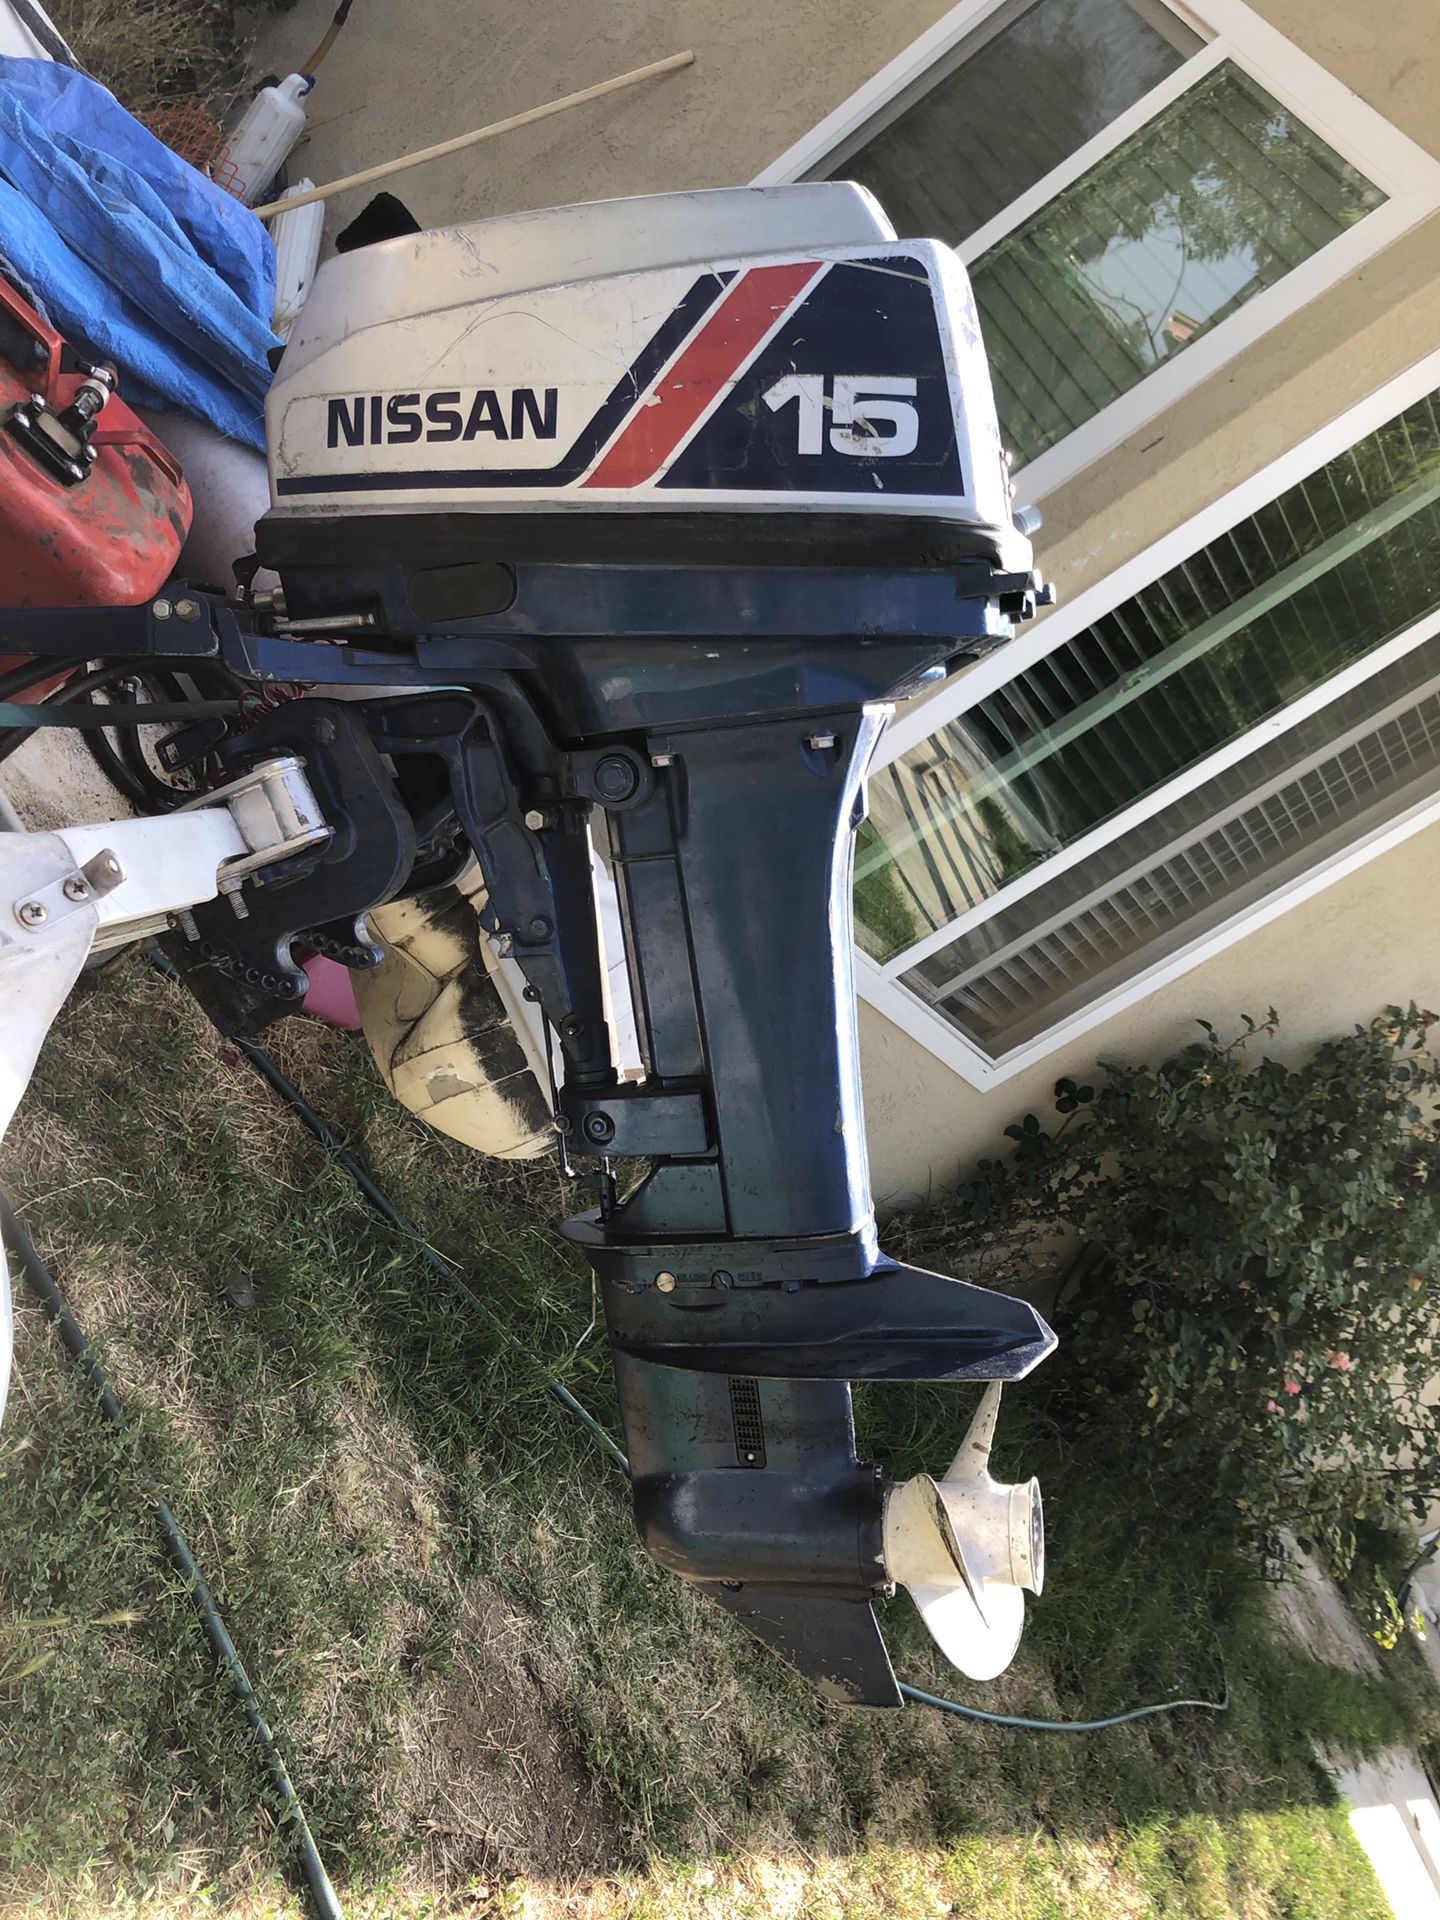 Nissan 15 hp outboard